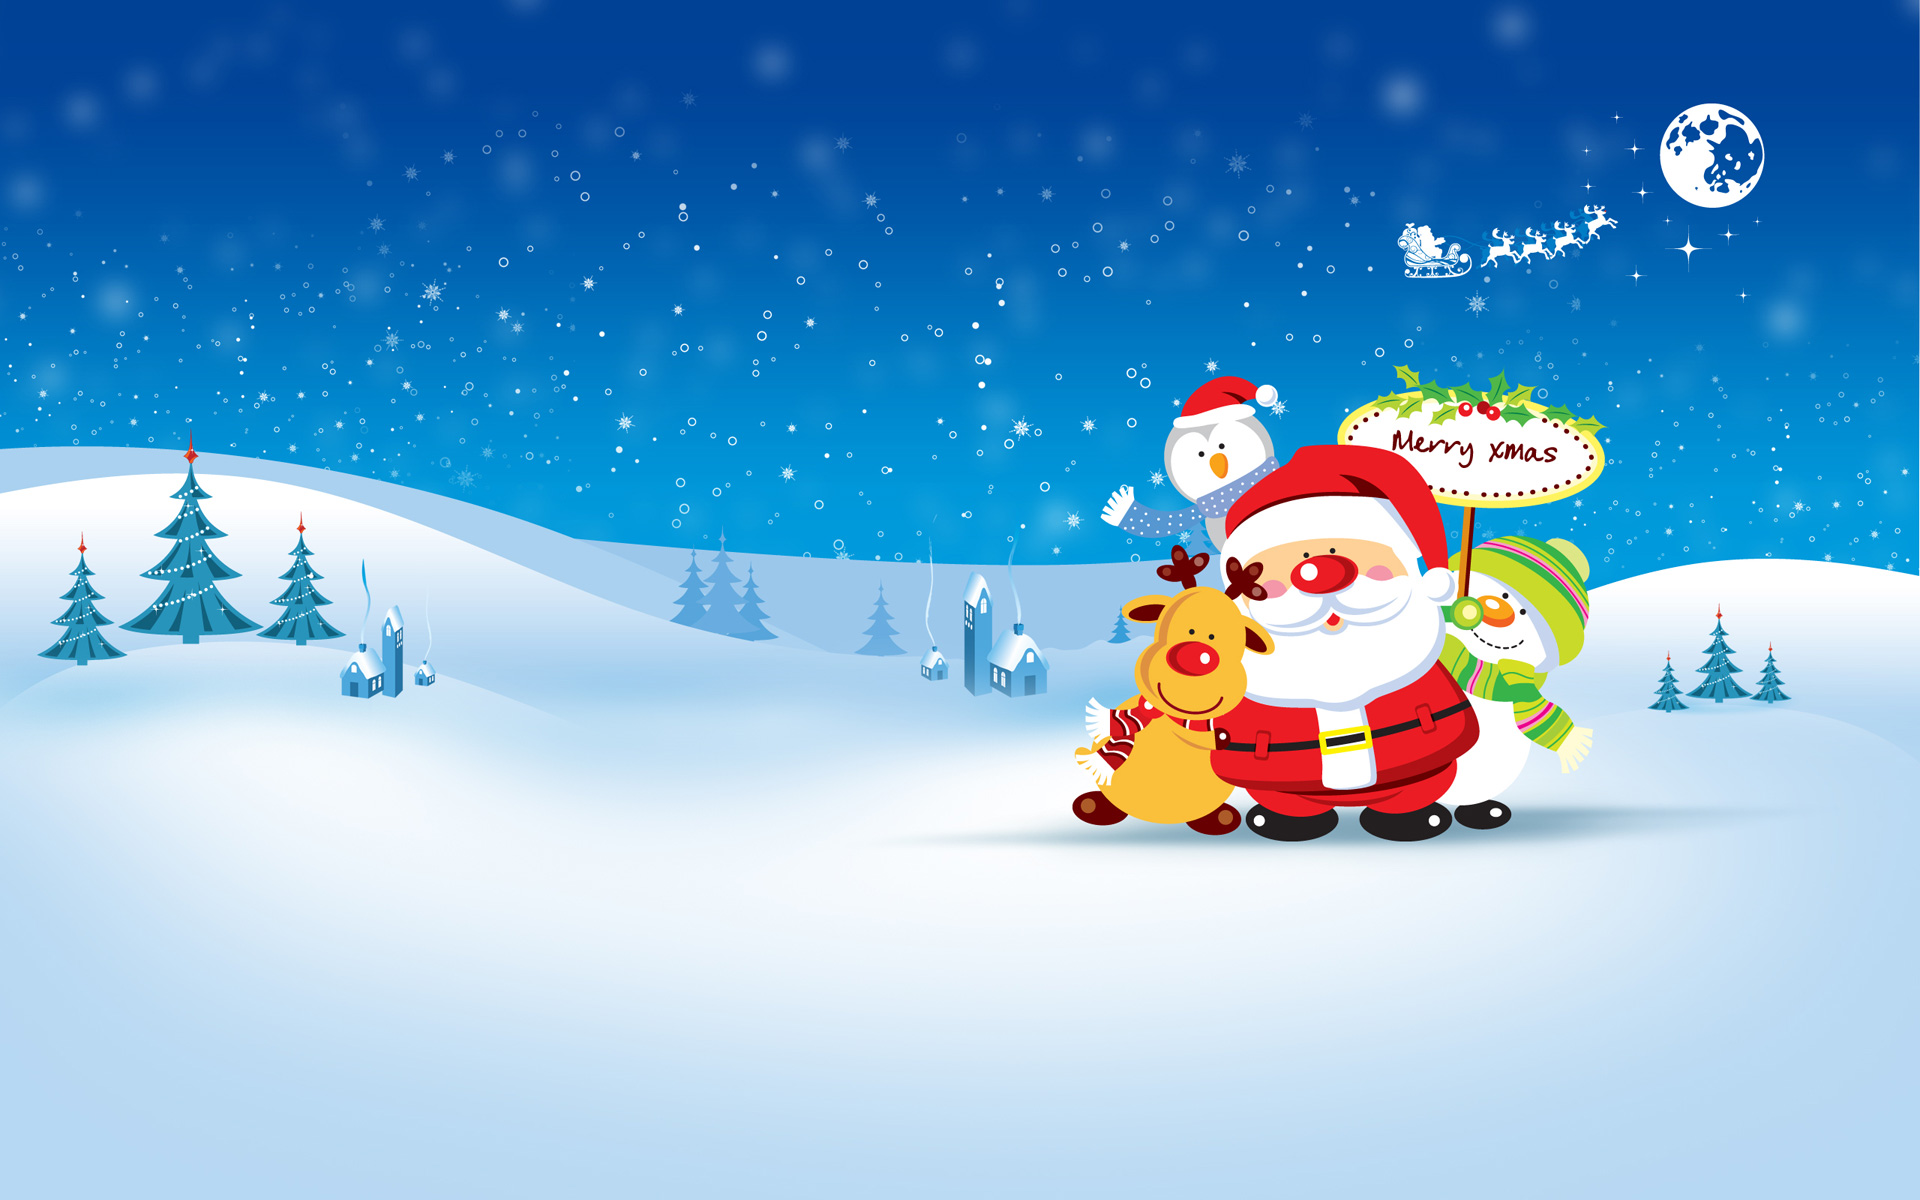 Winter christmas backgrounds